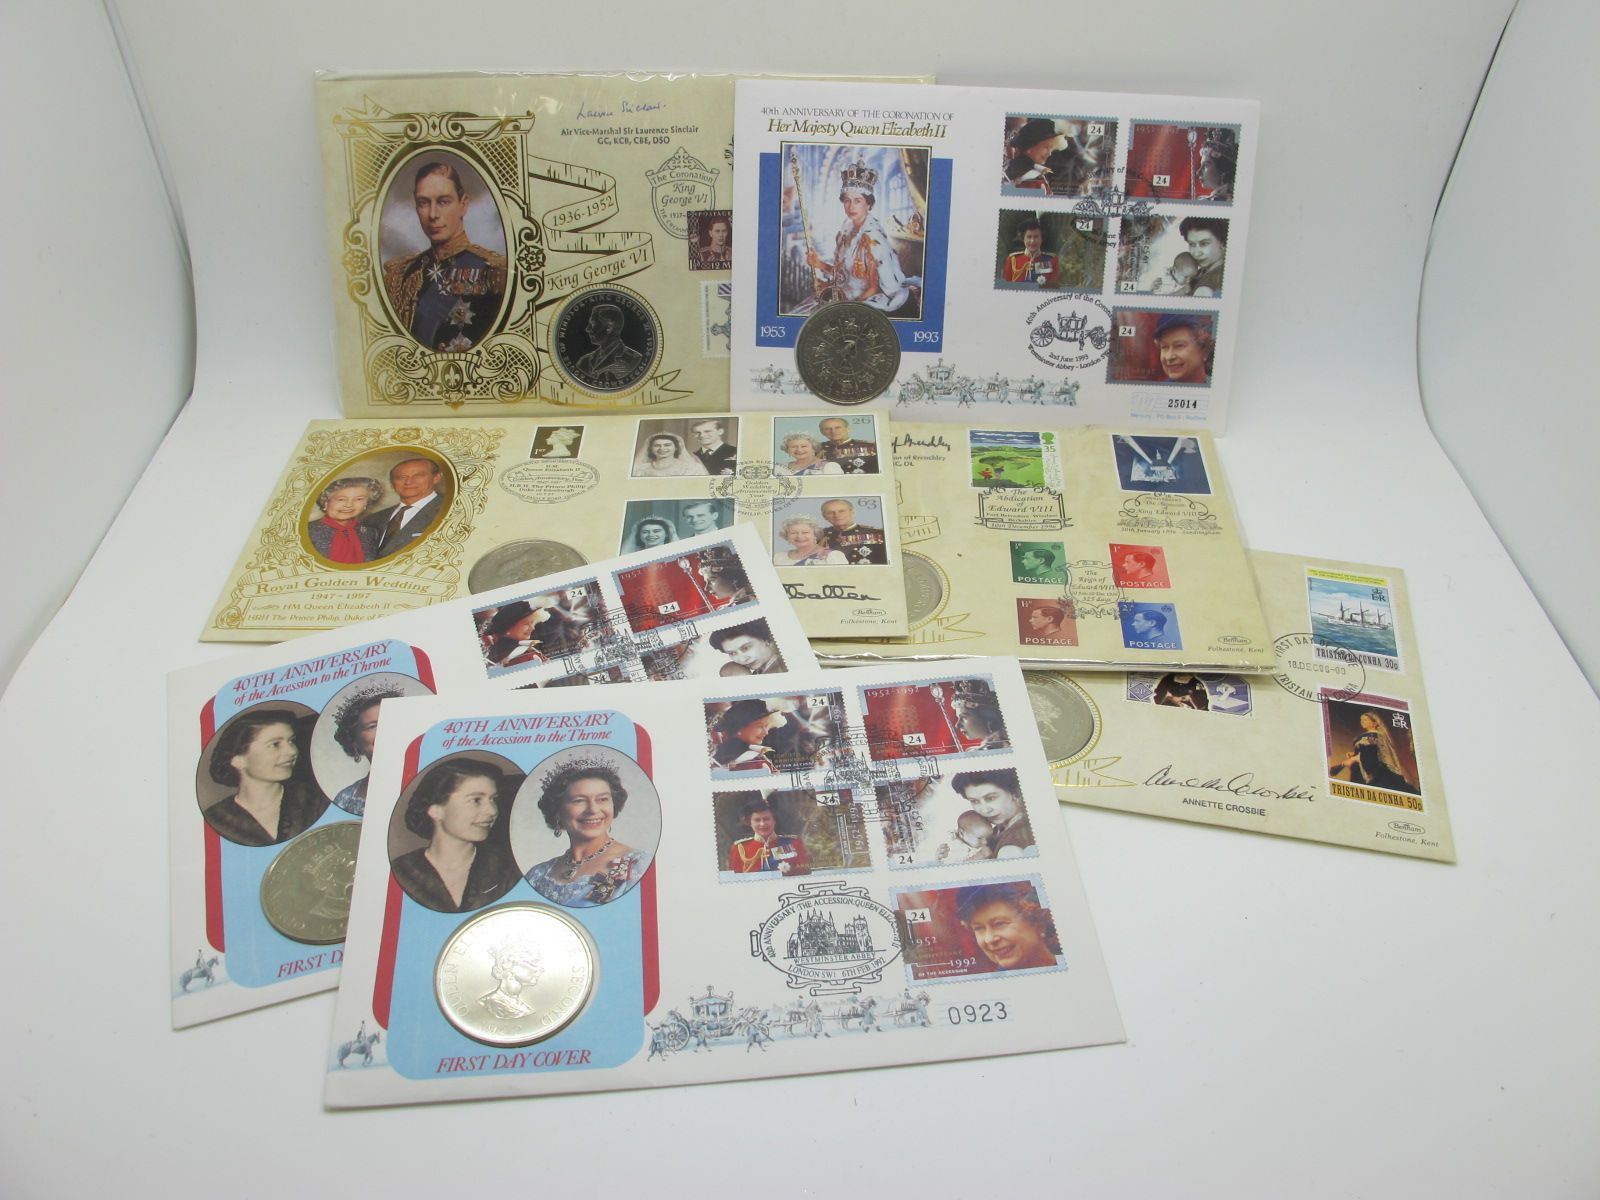 A Collection of GB Coin Covers, Queen Victoria Centenary of Diamond Jubilee, Royal Golden Wedding